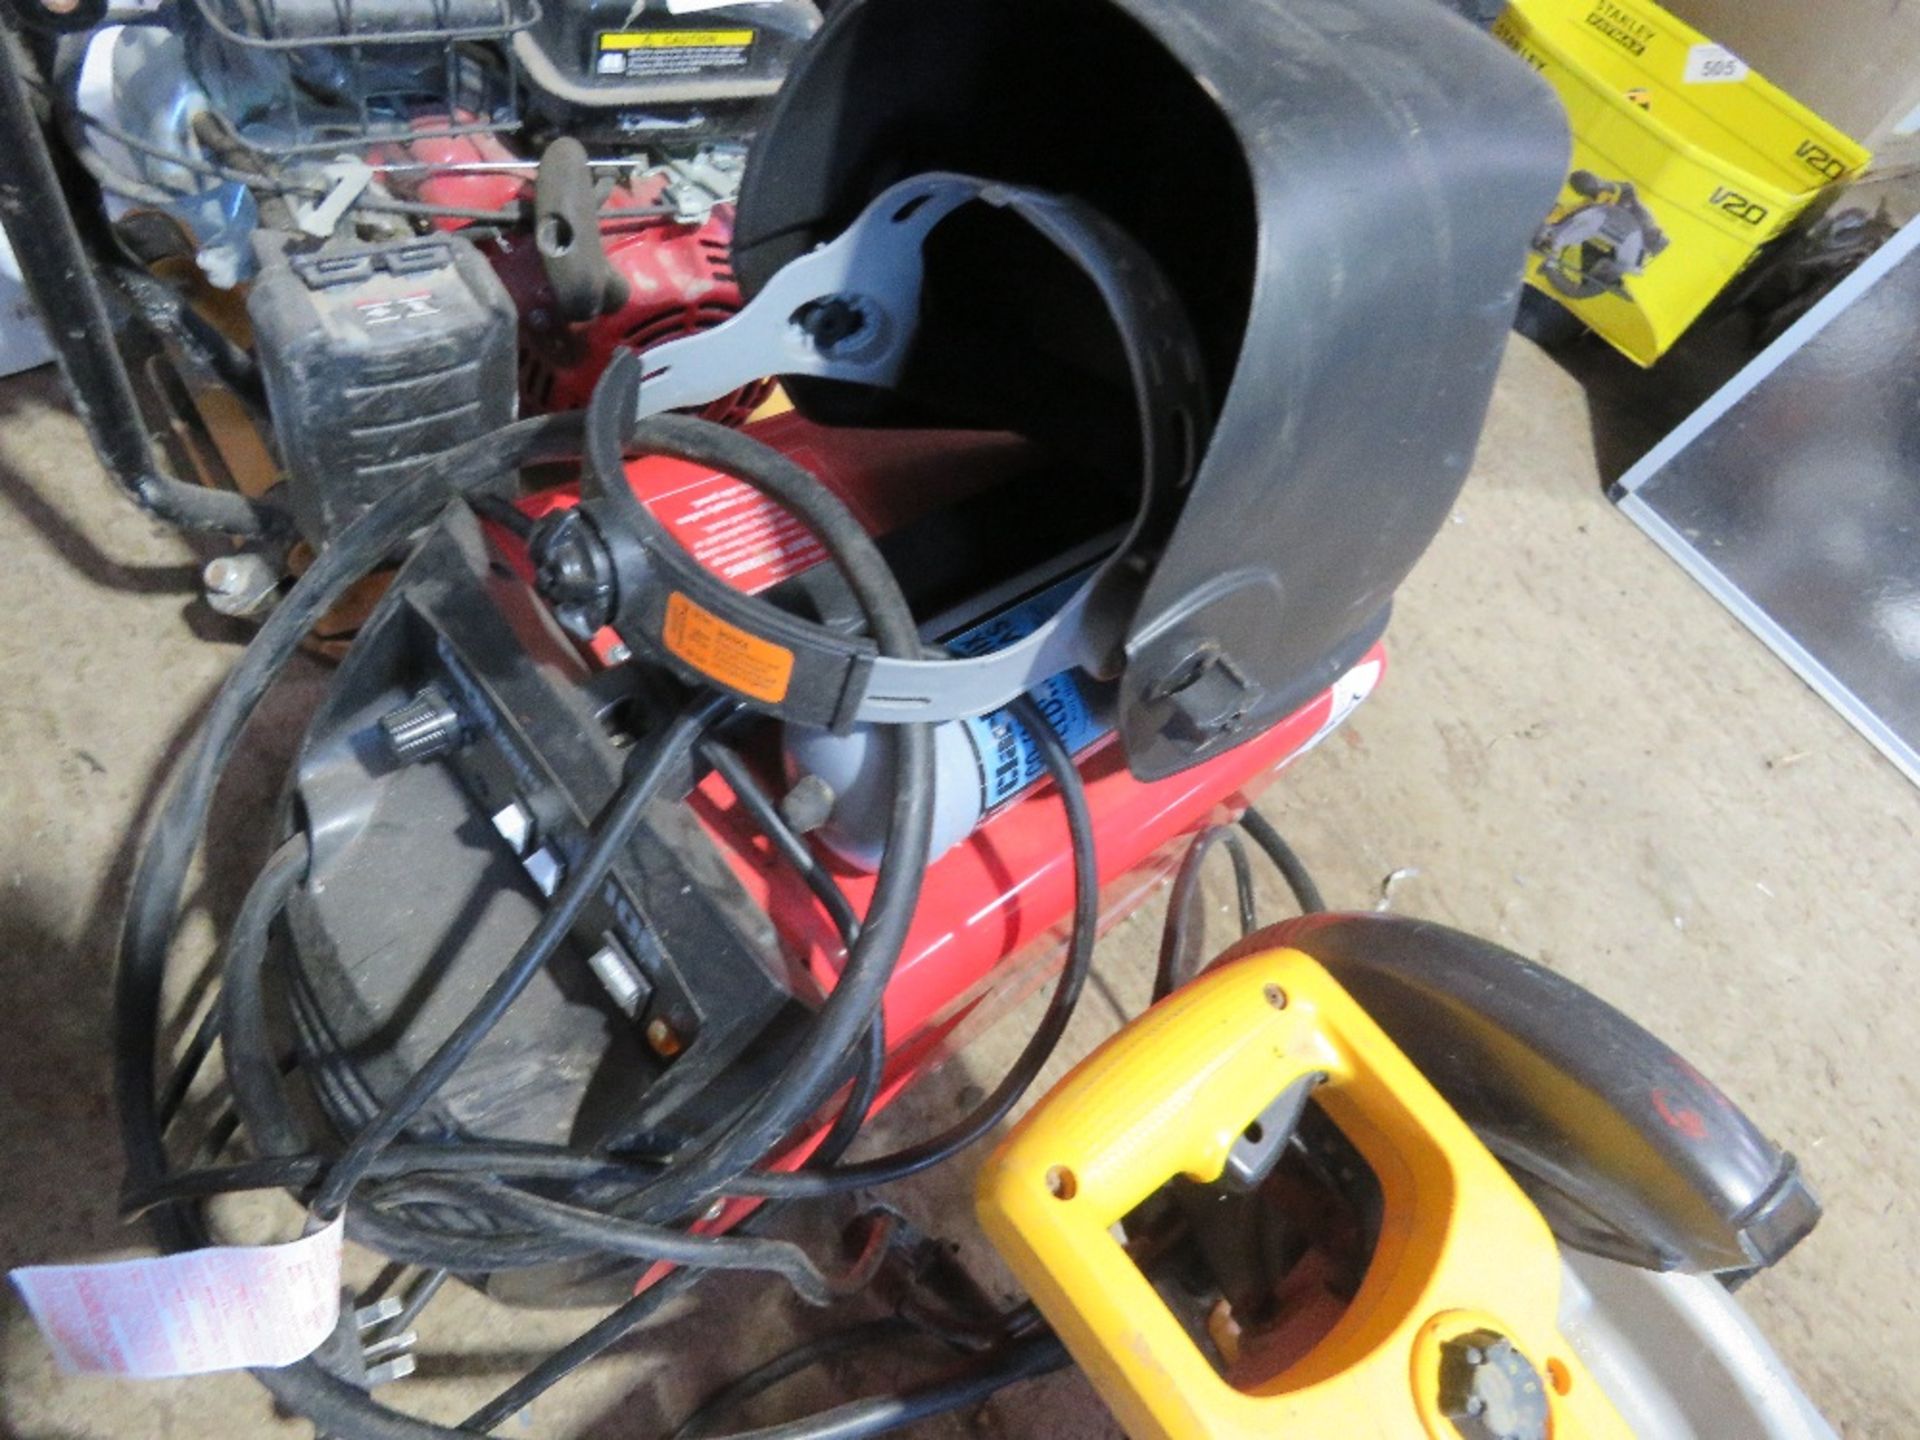 CLARKE 240VOLT MIG 106 WELDER WITH VISOR. DIRECT FROM LOCAL LANDSCAPE COMPANY WHO ARE CLOSING A DEPO